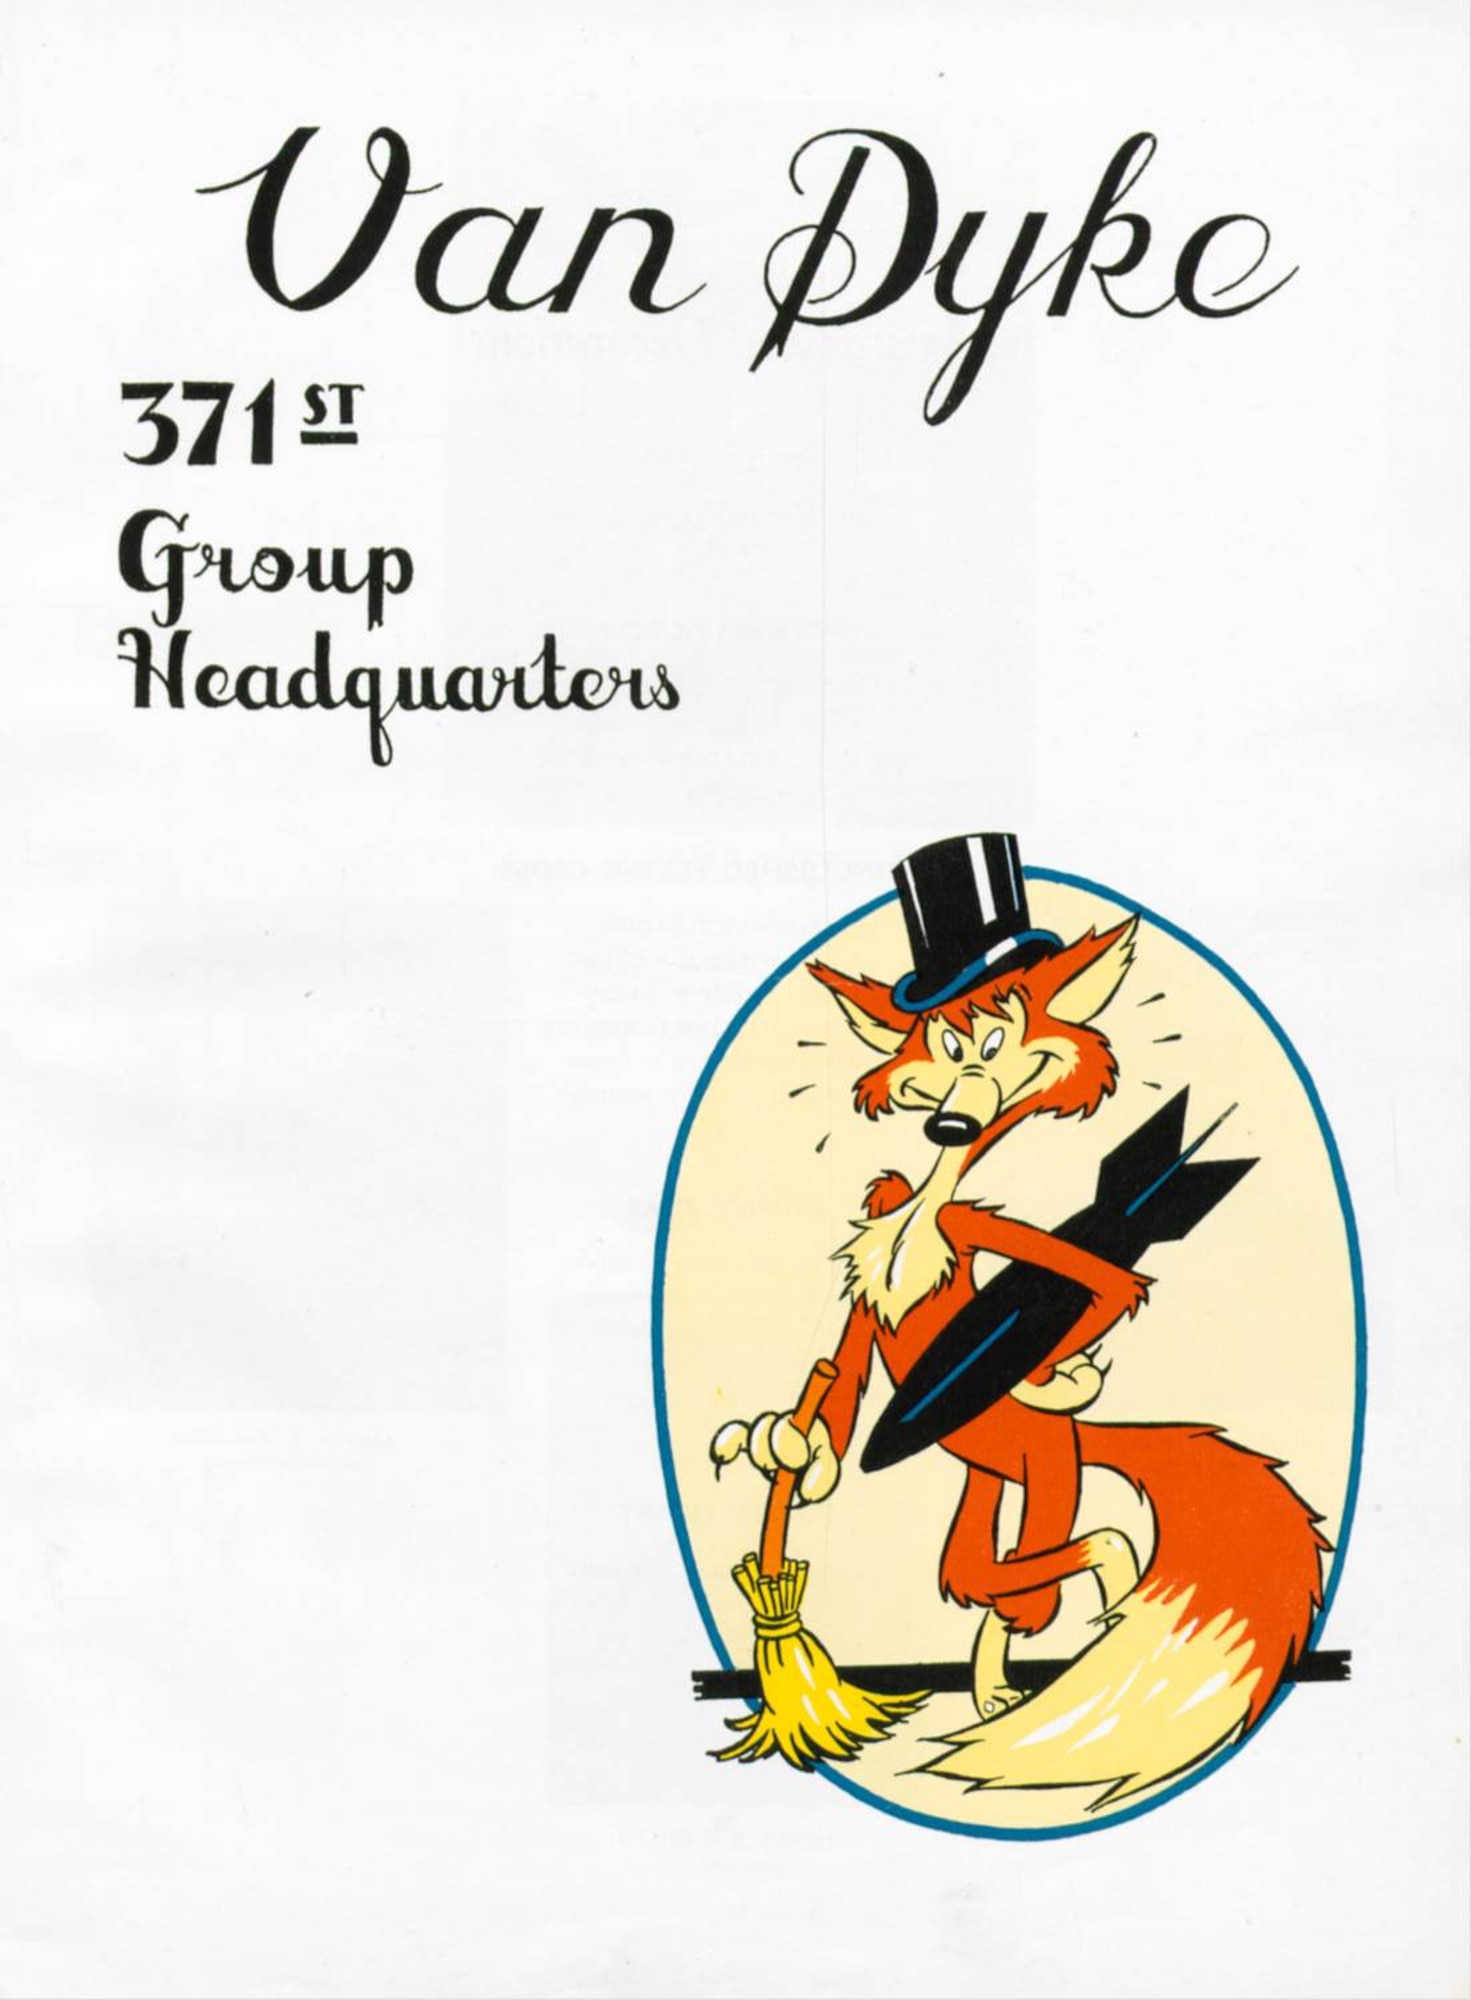 Pictured here is the colorful unofficial 371st Fighter Group emblem, a fox in a top hat standing confidently with a bomb to blast an enemy and a broom to sweep the pieces away.  The group’s radio callsign was “Van Dyke.”   There was another unofficial caricature in the group of a generic Airman named “Frisky” who found himself in cartoons in comedic situations around the group.  It appears the name Frisky was given to the Fox too and became a moniker for the 371st Fighter Group.  A big sign bearing the Fox with the name Frisky beneath it was displayed prominently at one airfield, perhaps outside group headquarters.  And the group’s baseball team was named the “Frisky Foxes” – they won the XIX TAC baseball championship in July, 1945.  (The Story of the 371st Fighter Group in the E.T.O.)